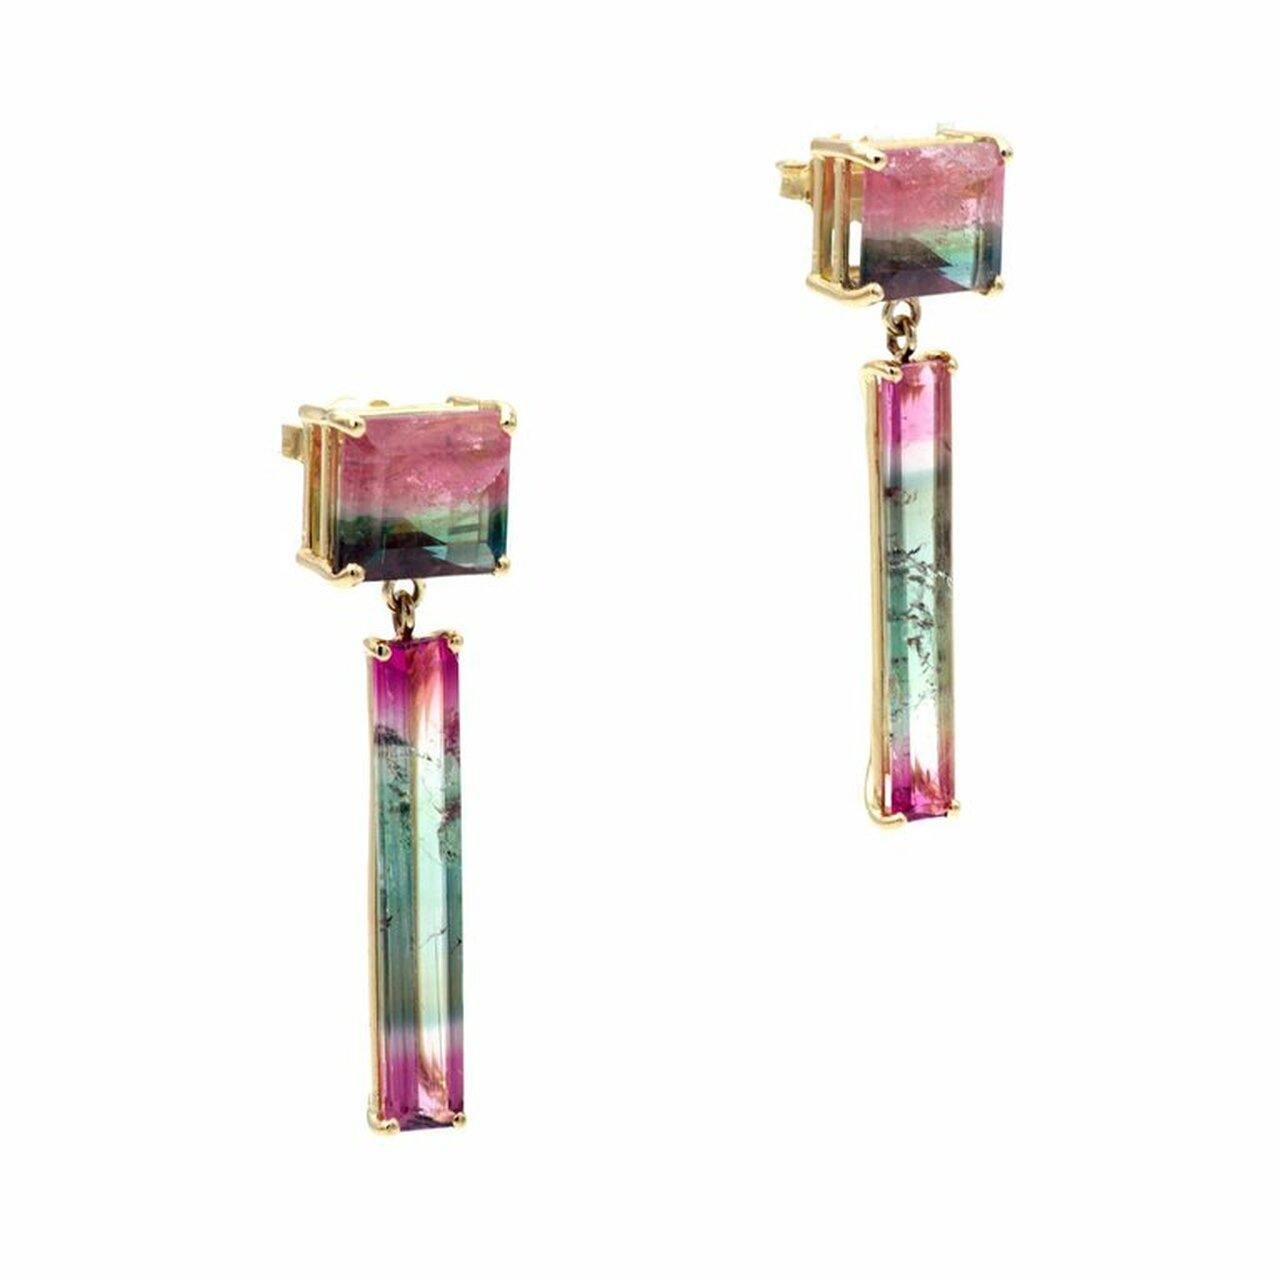 Peter Suchy 12.35 Carat Bi-Color Tourmaline Gold Dangle Earrings made in the Peter Suchy Workshop.

2 square bi-color watermelon green & red Tourmaline, approx. total weight 7.25cts, 
2 rectangle bi-color watermelon Tourmaline, approx. total weight